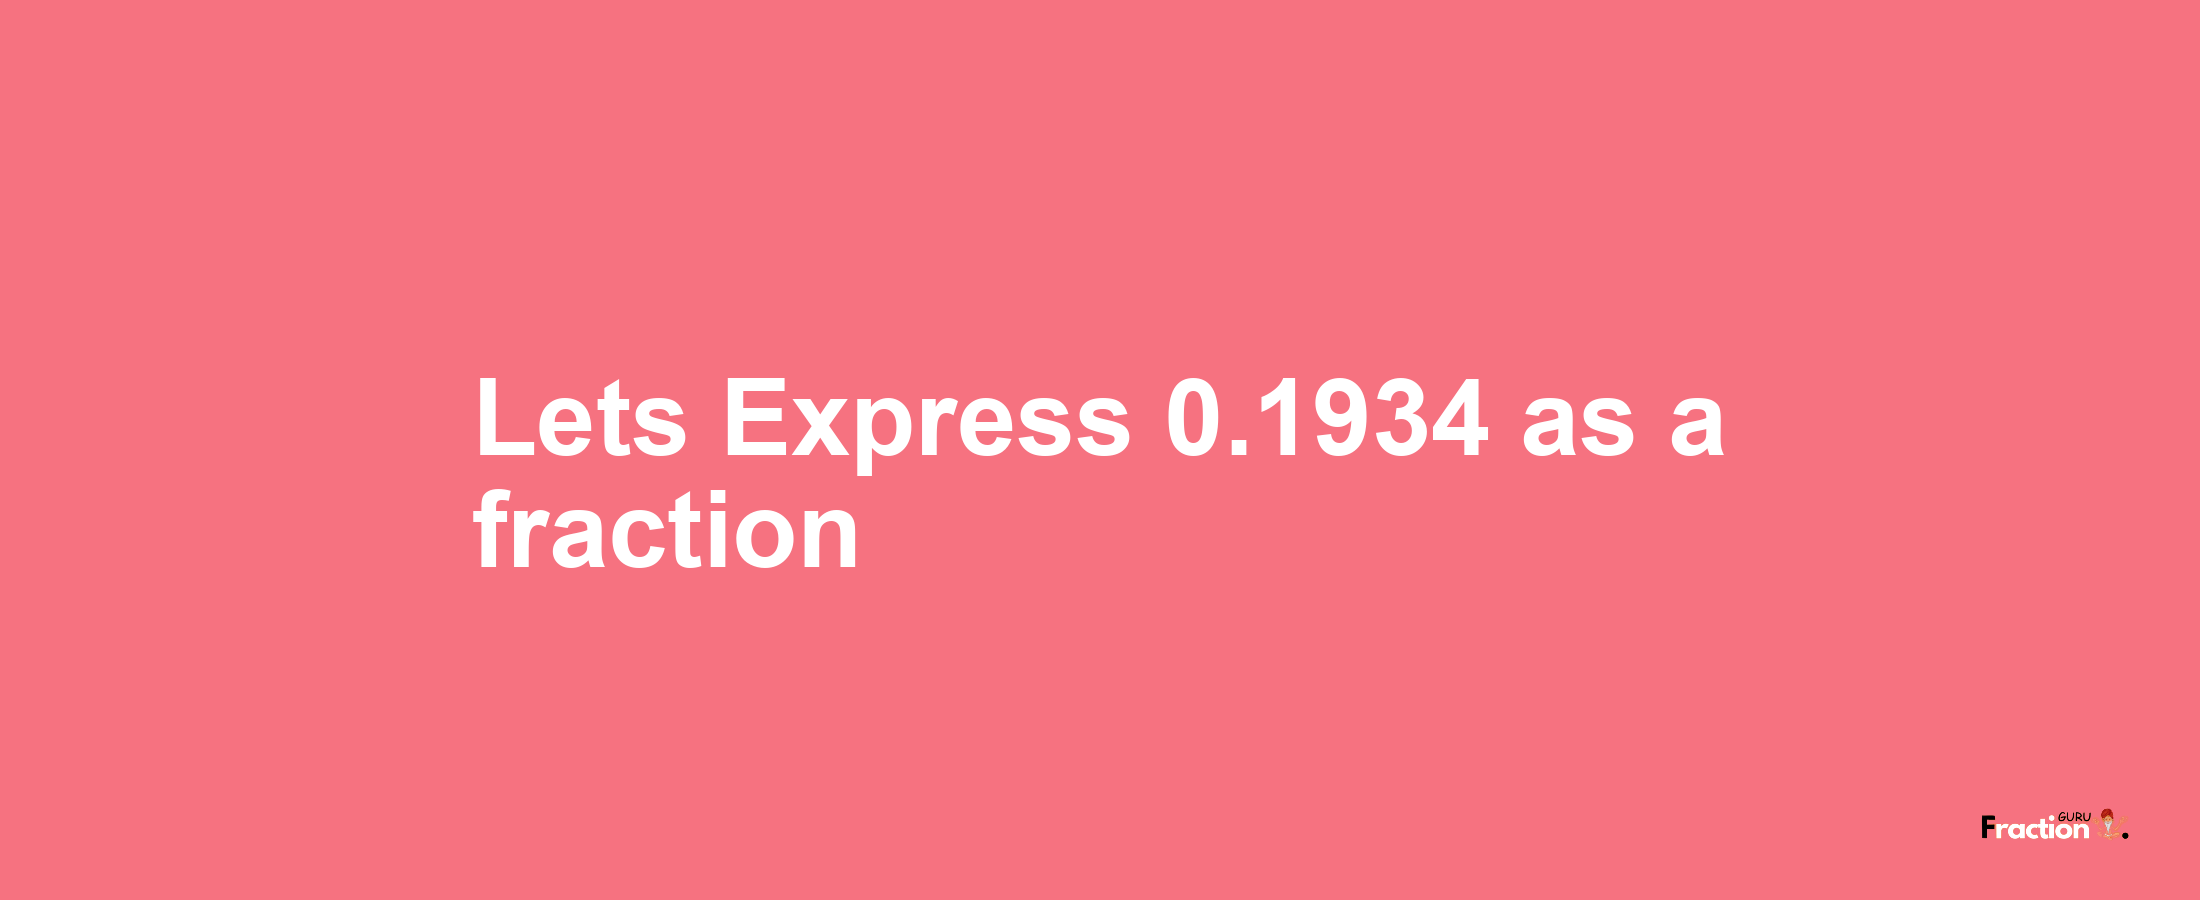 Lets Express 0.1934 as afraction